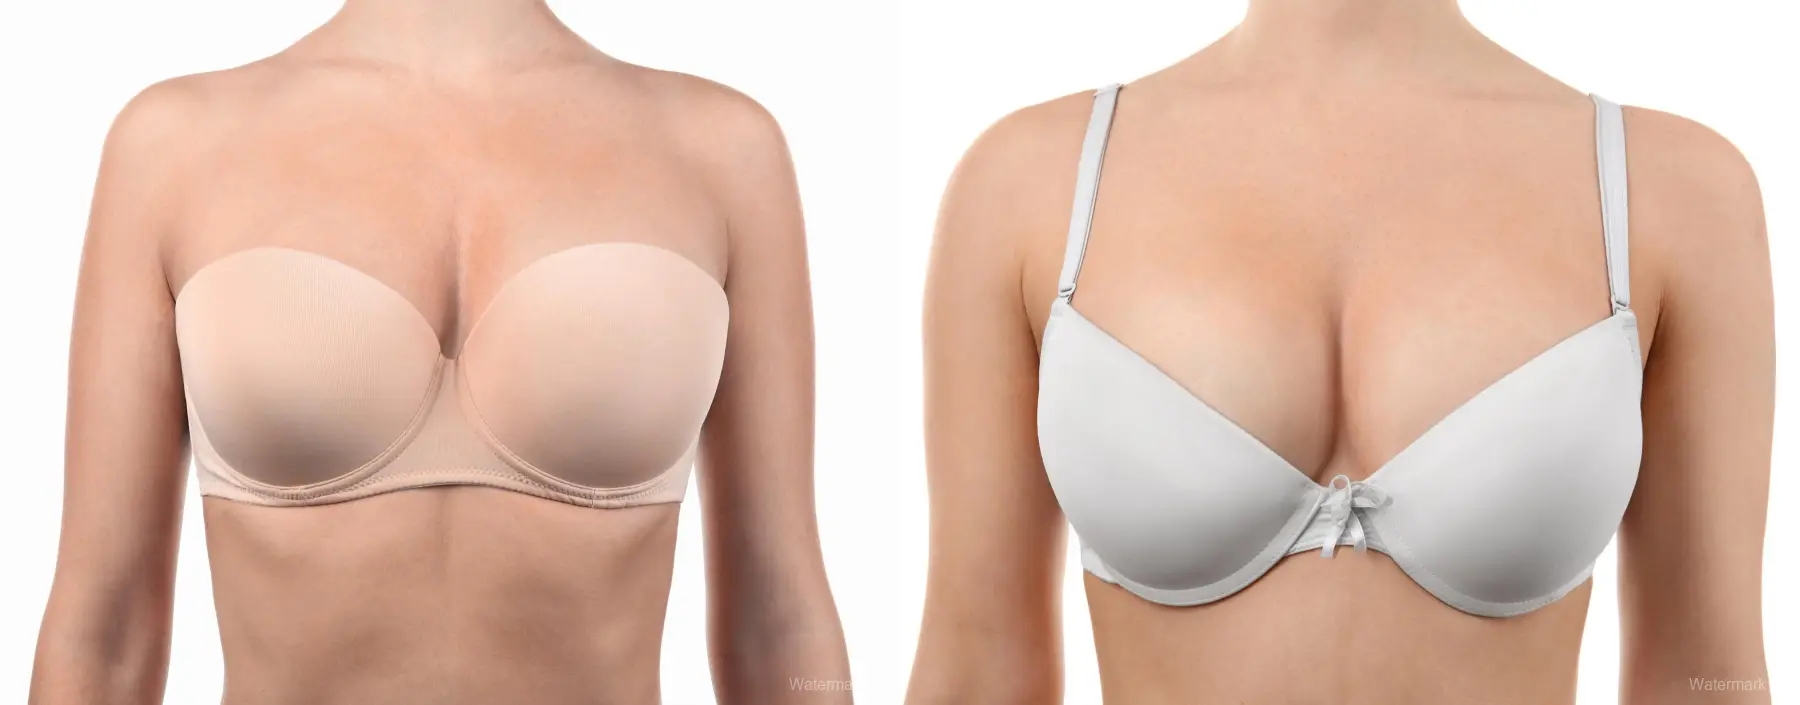 Breast Augmentation: Patient 2 - Before and After 1